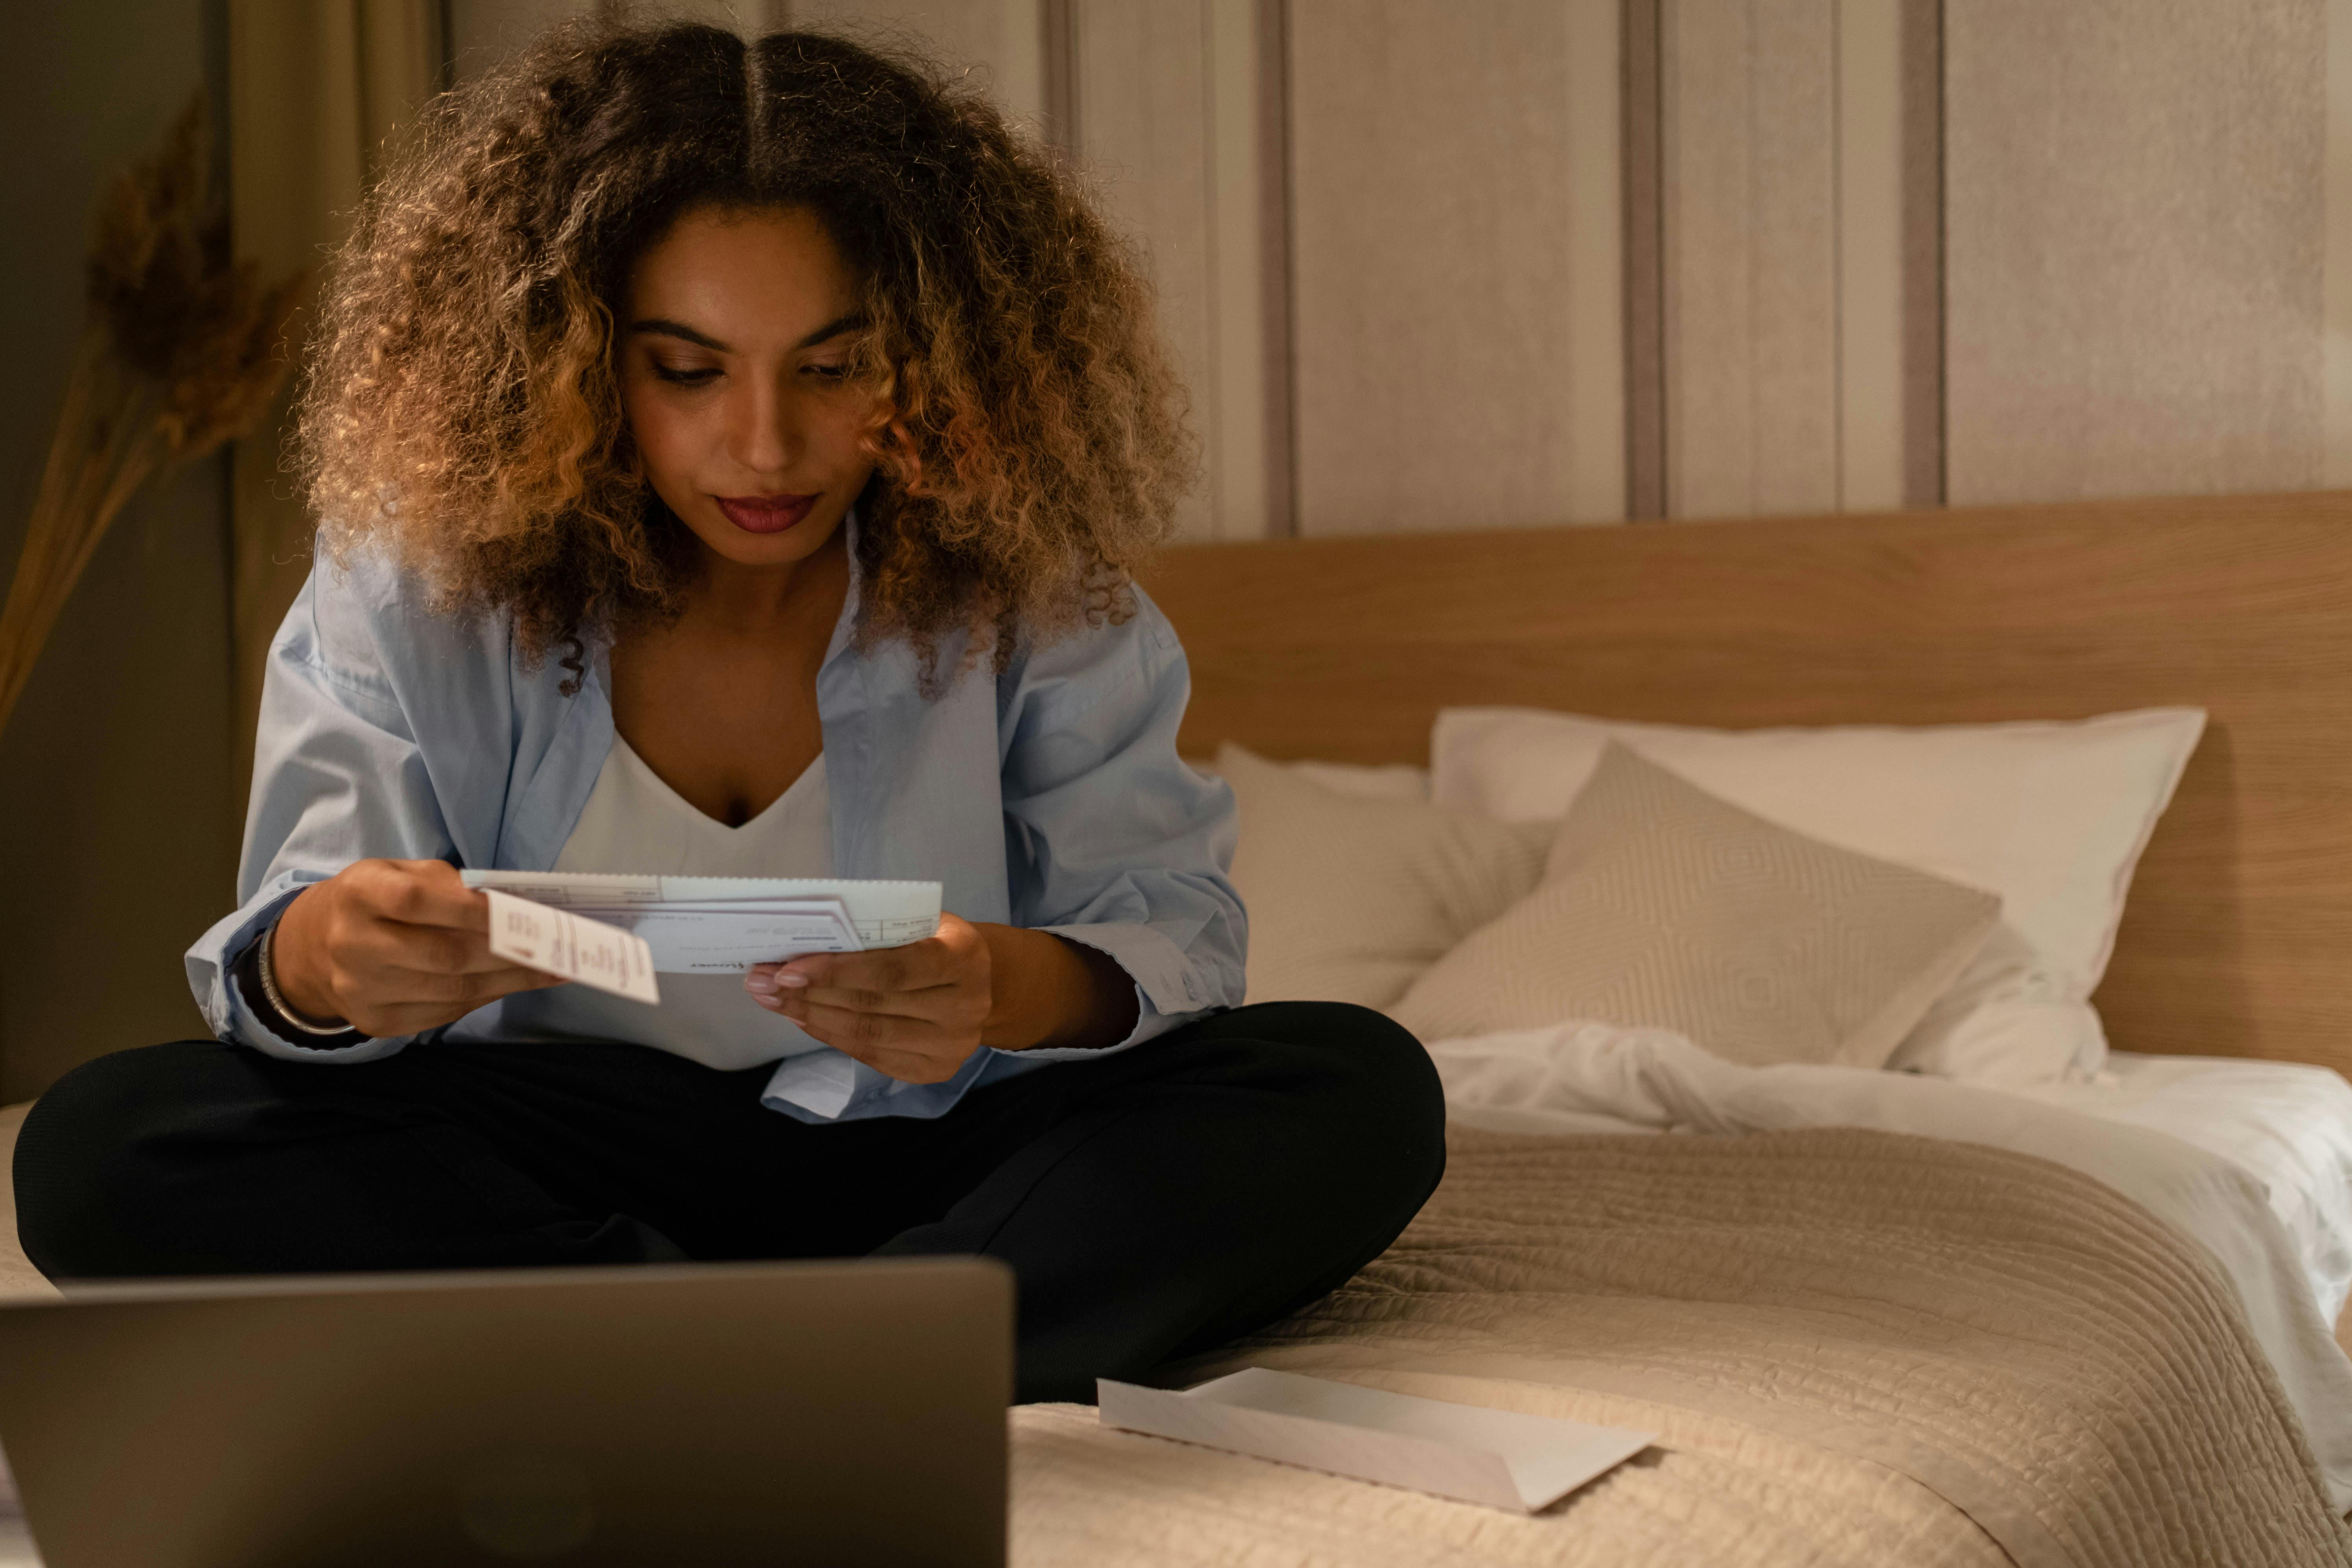 A woman reading a letter in her bedroom | Source: Pexels